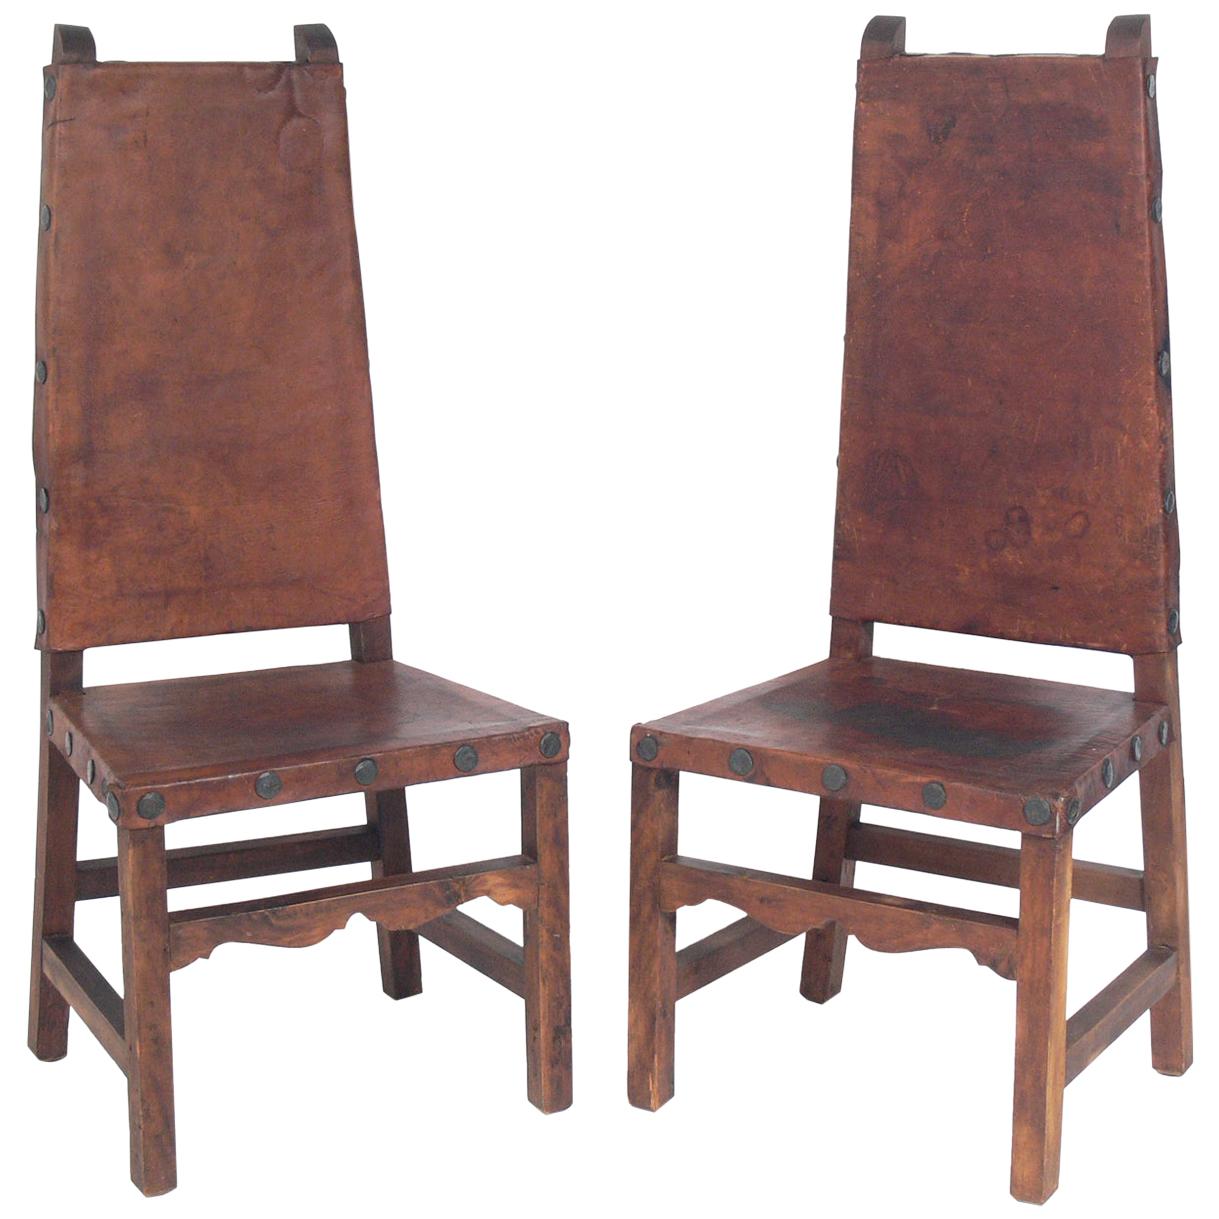 Pair of Tall Back Mexican Leather Chairs